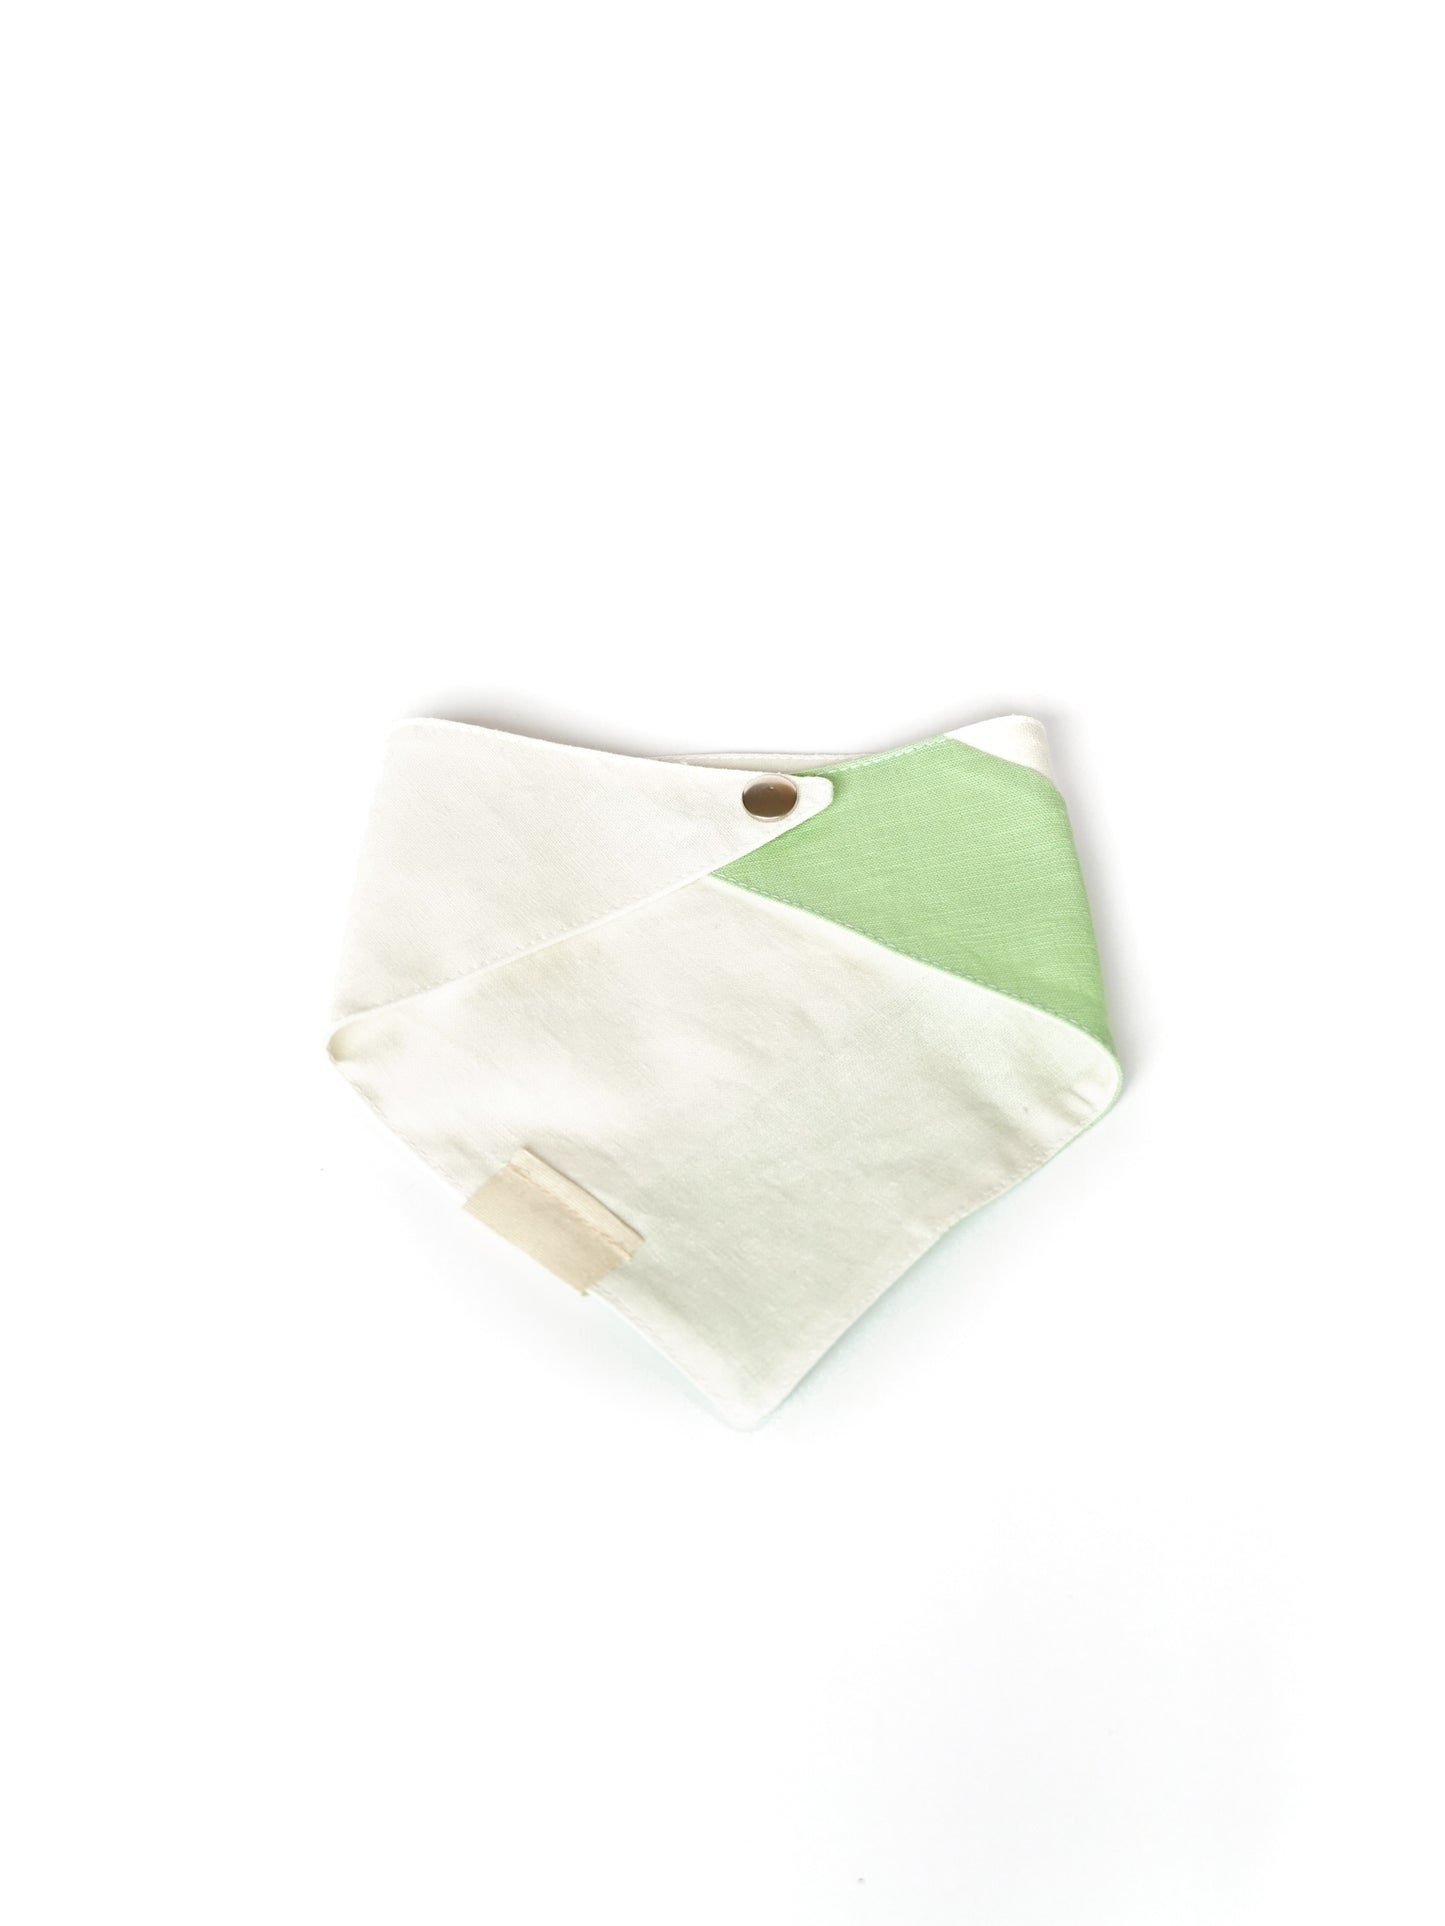 Pom & Chi Sustainable Small Dog Bandana Spring In My Step in Mint Green